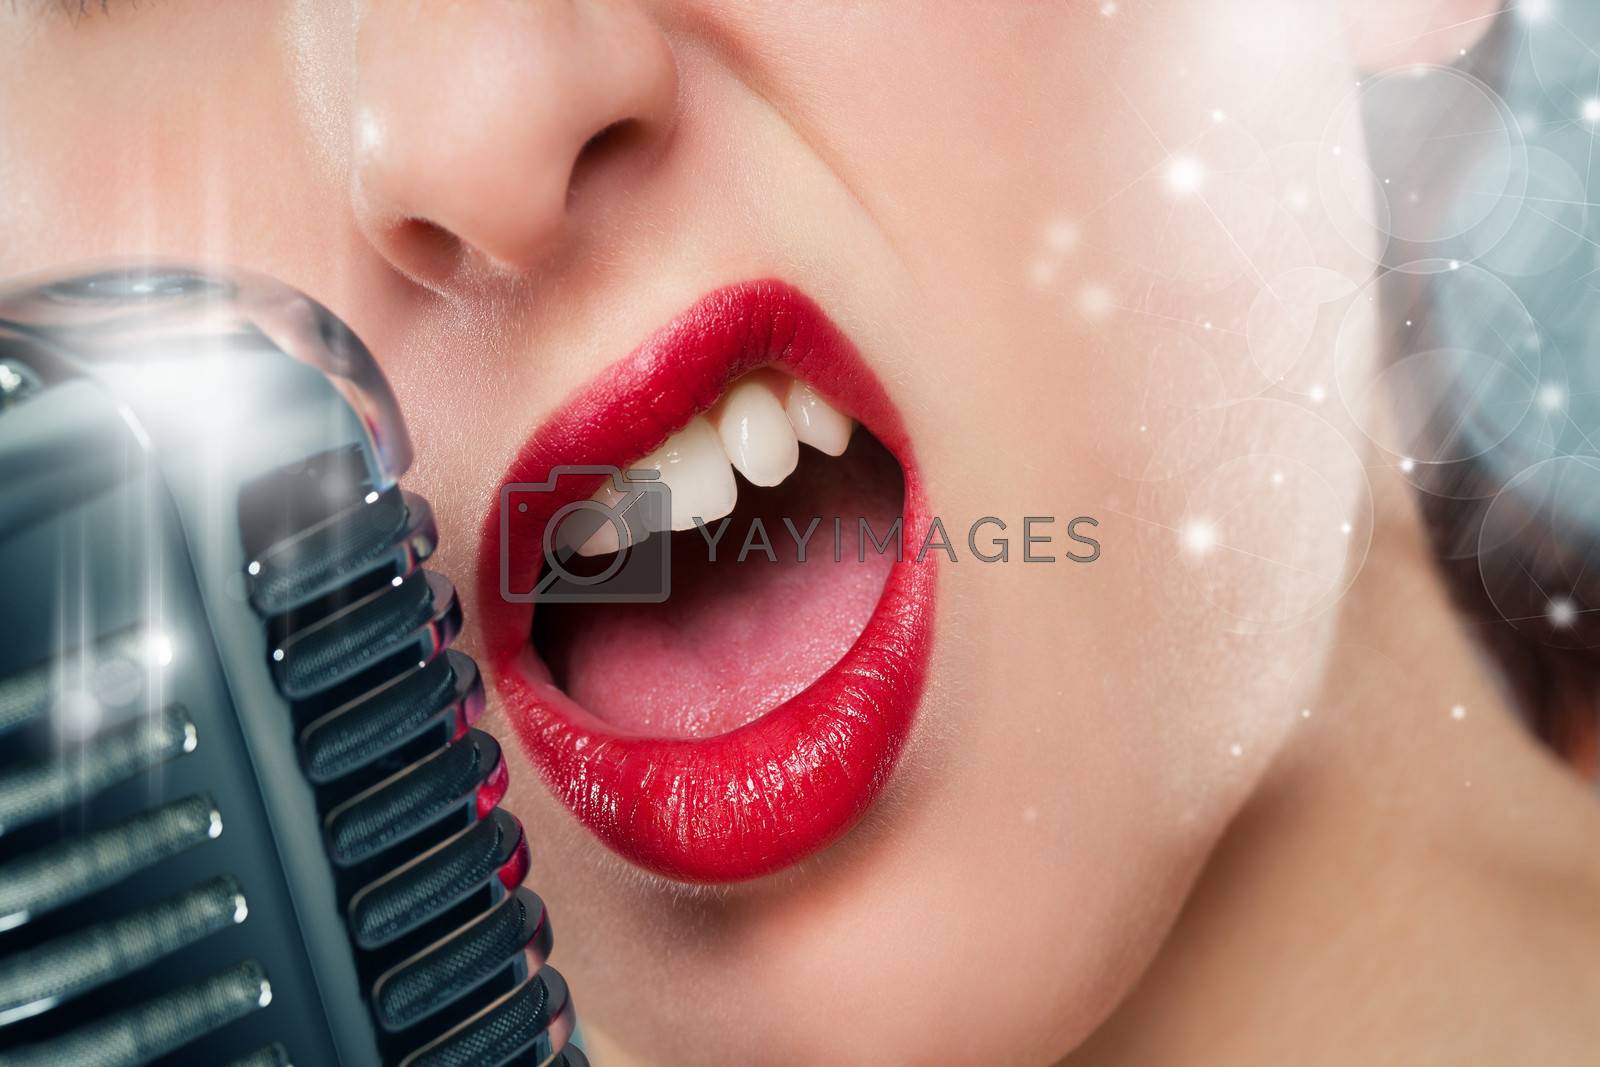 Royalty free image of woman singing by RobStark